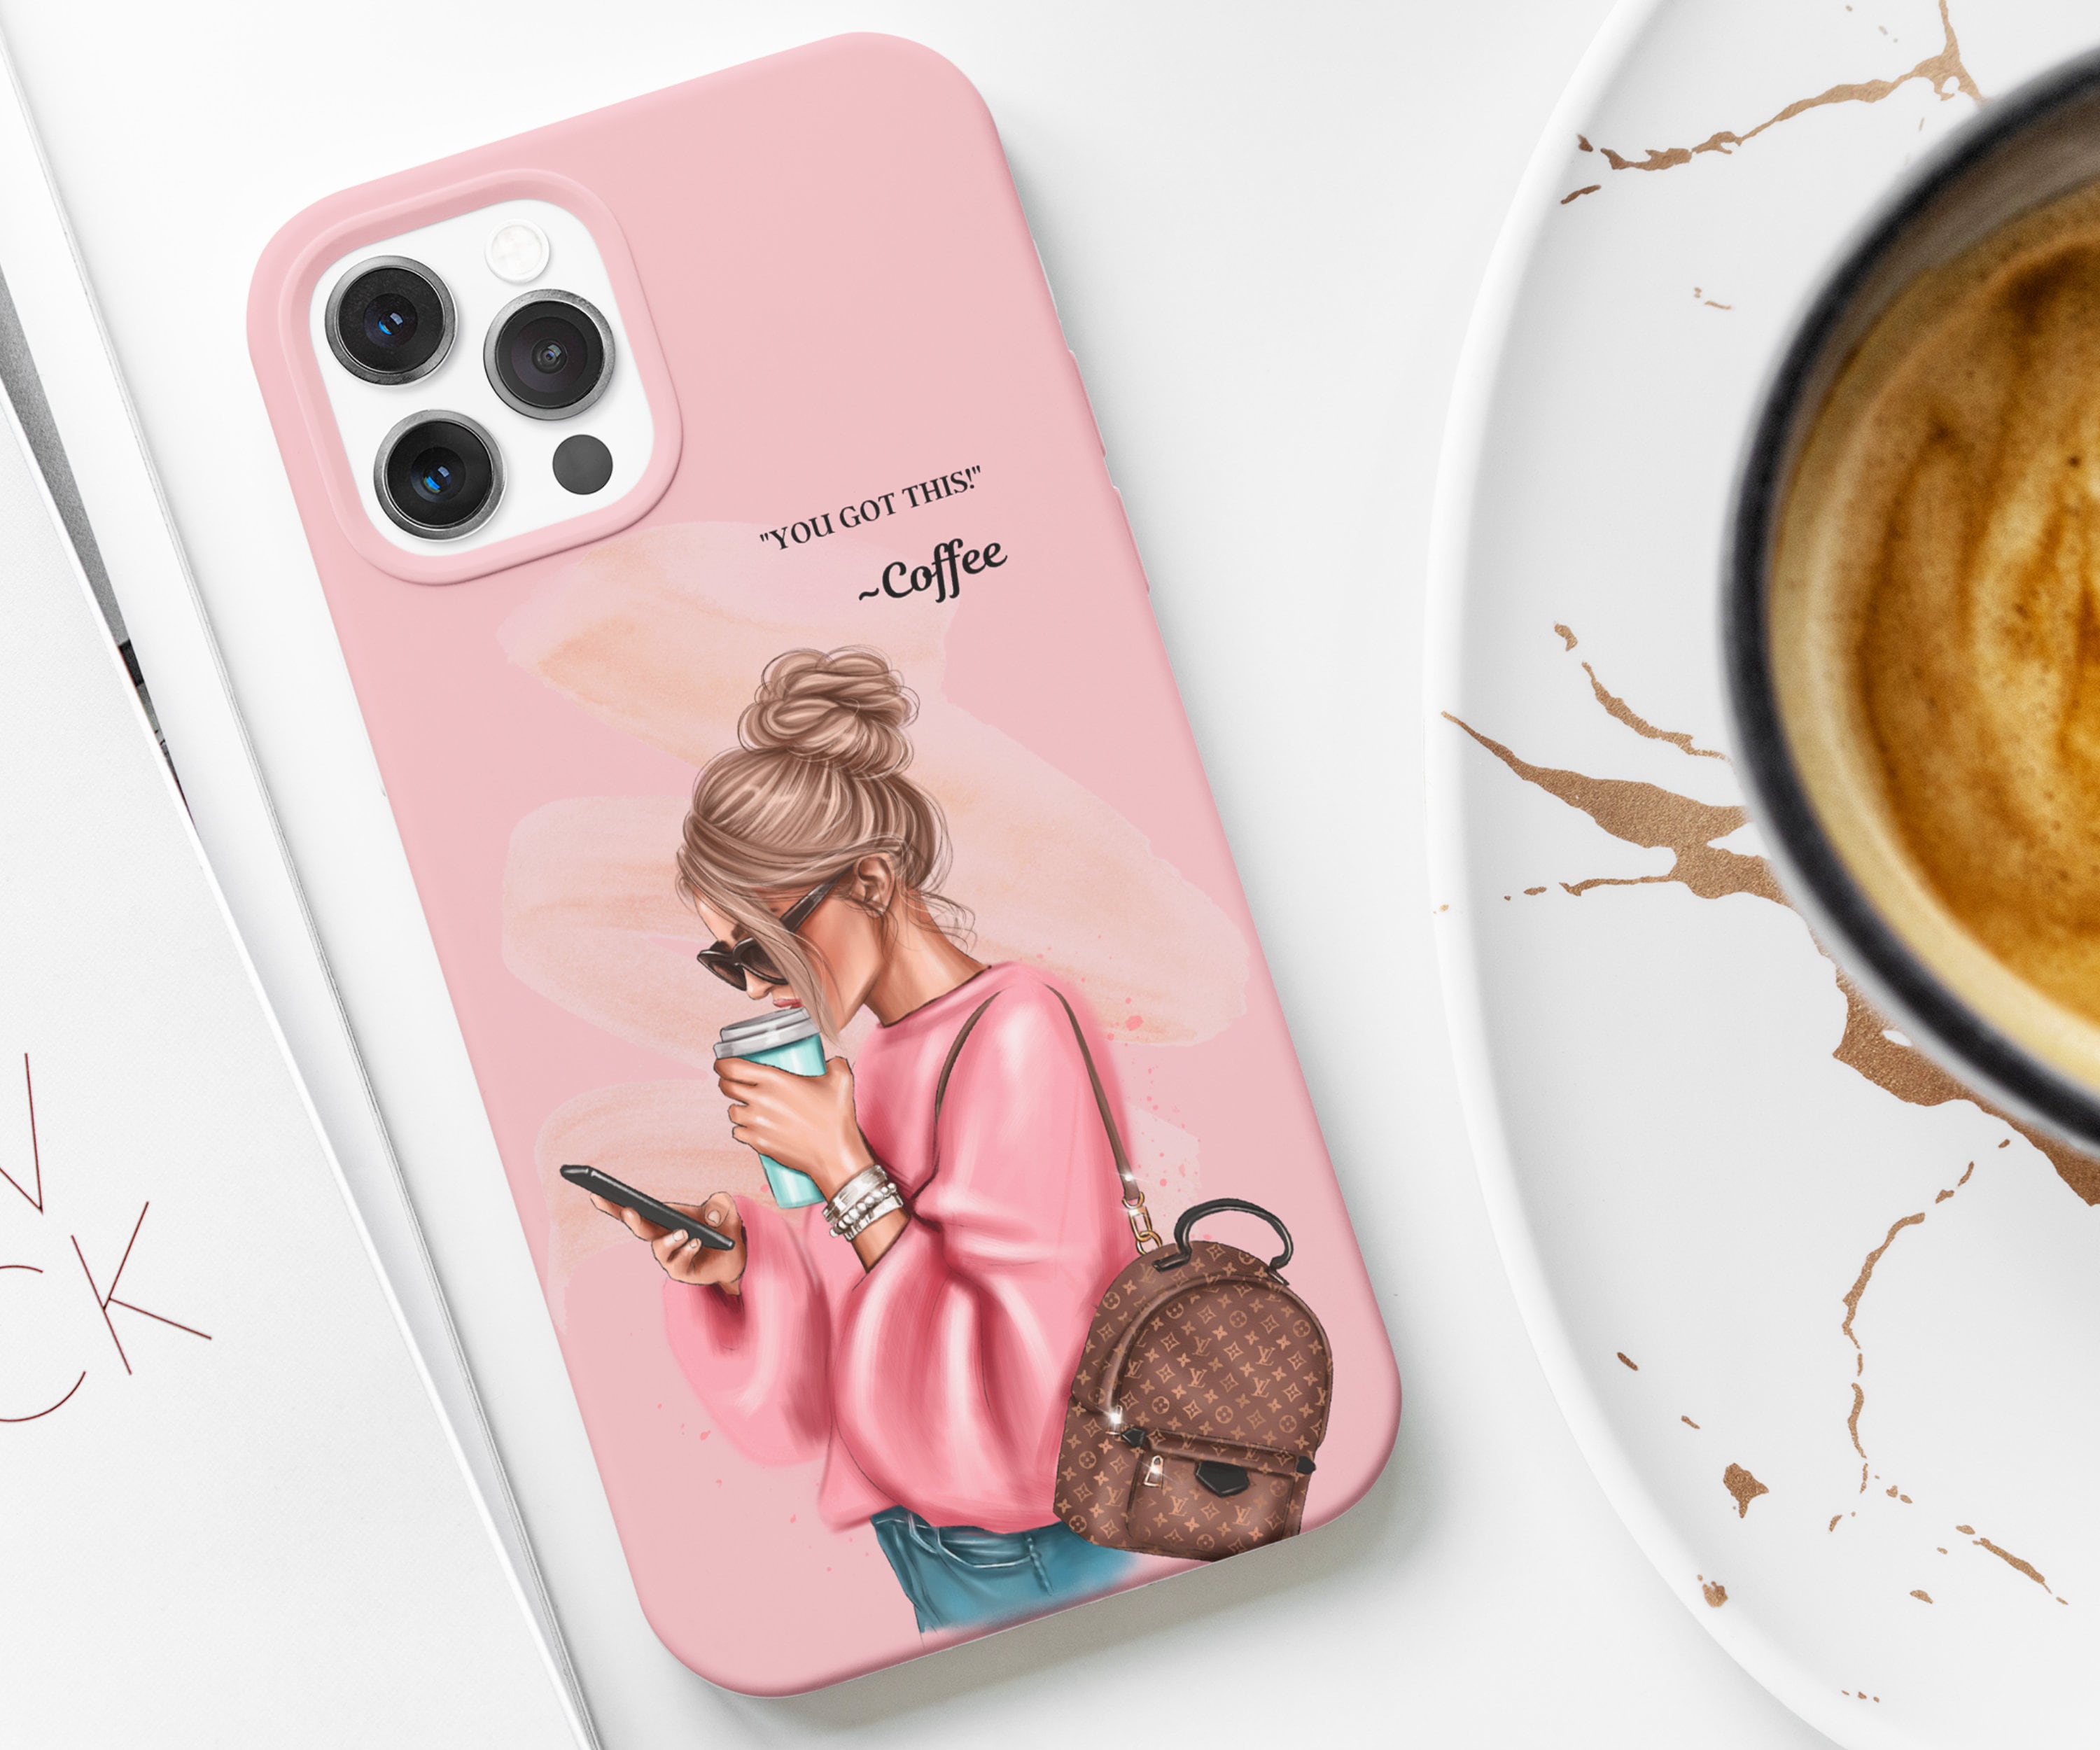 STARBUCKS PHONE COVER CASE rubber coffee drink cup 2.5 x 5 protector  UNIQUE